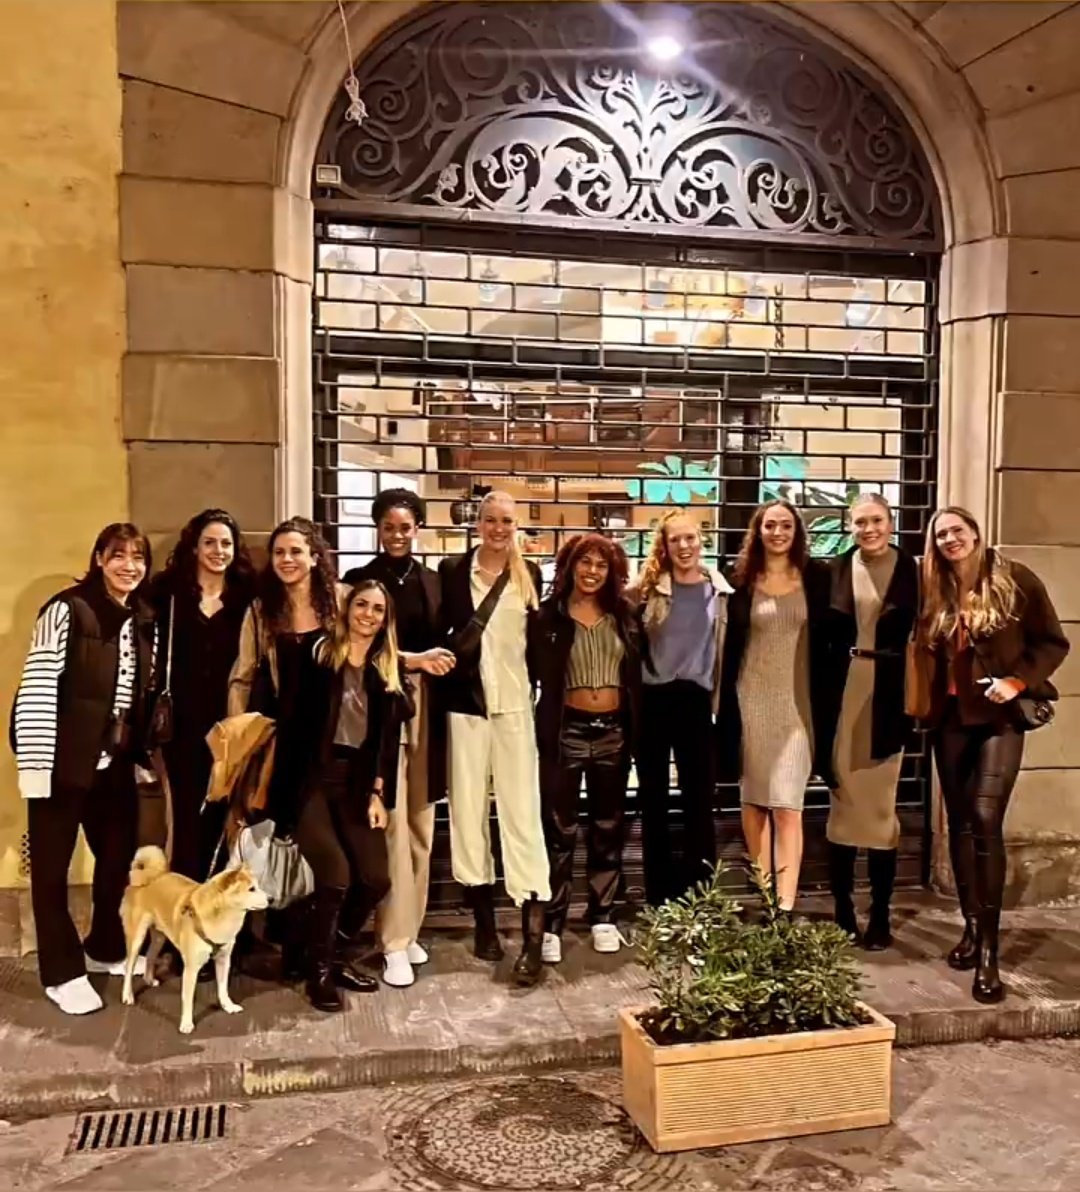 mayu and her teammates had dinner at parione on wednesday.

in lauren's interview with volleynews, she said that giulia would organize dinner for the team. i wonder if she planned this one too?

happy to see the team get along well. good luck for the match on sunday @m_ish_0514💙